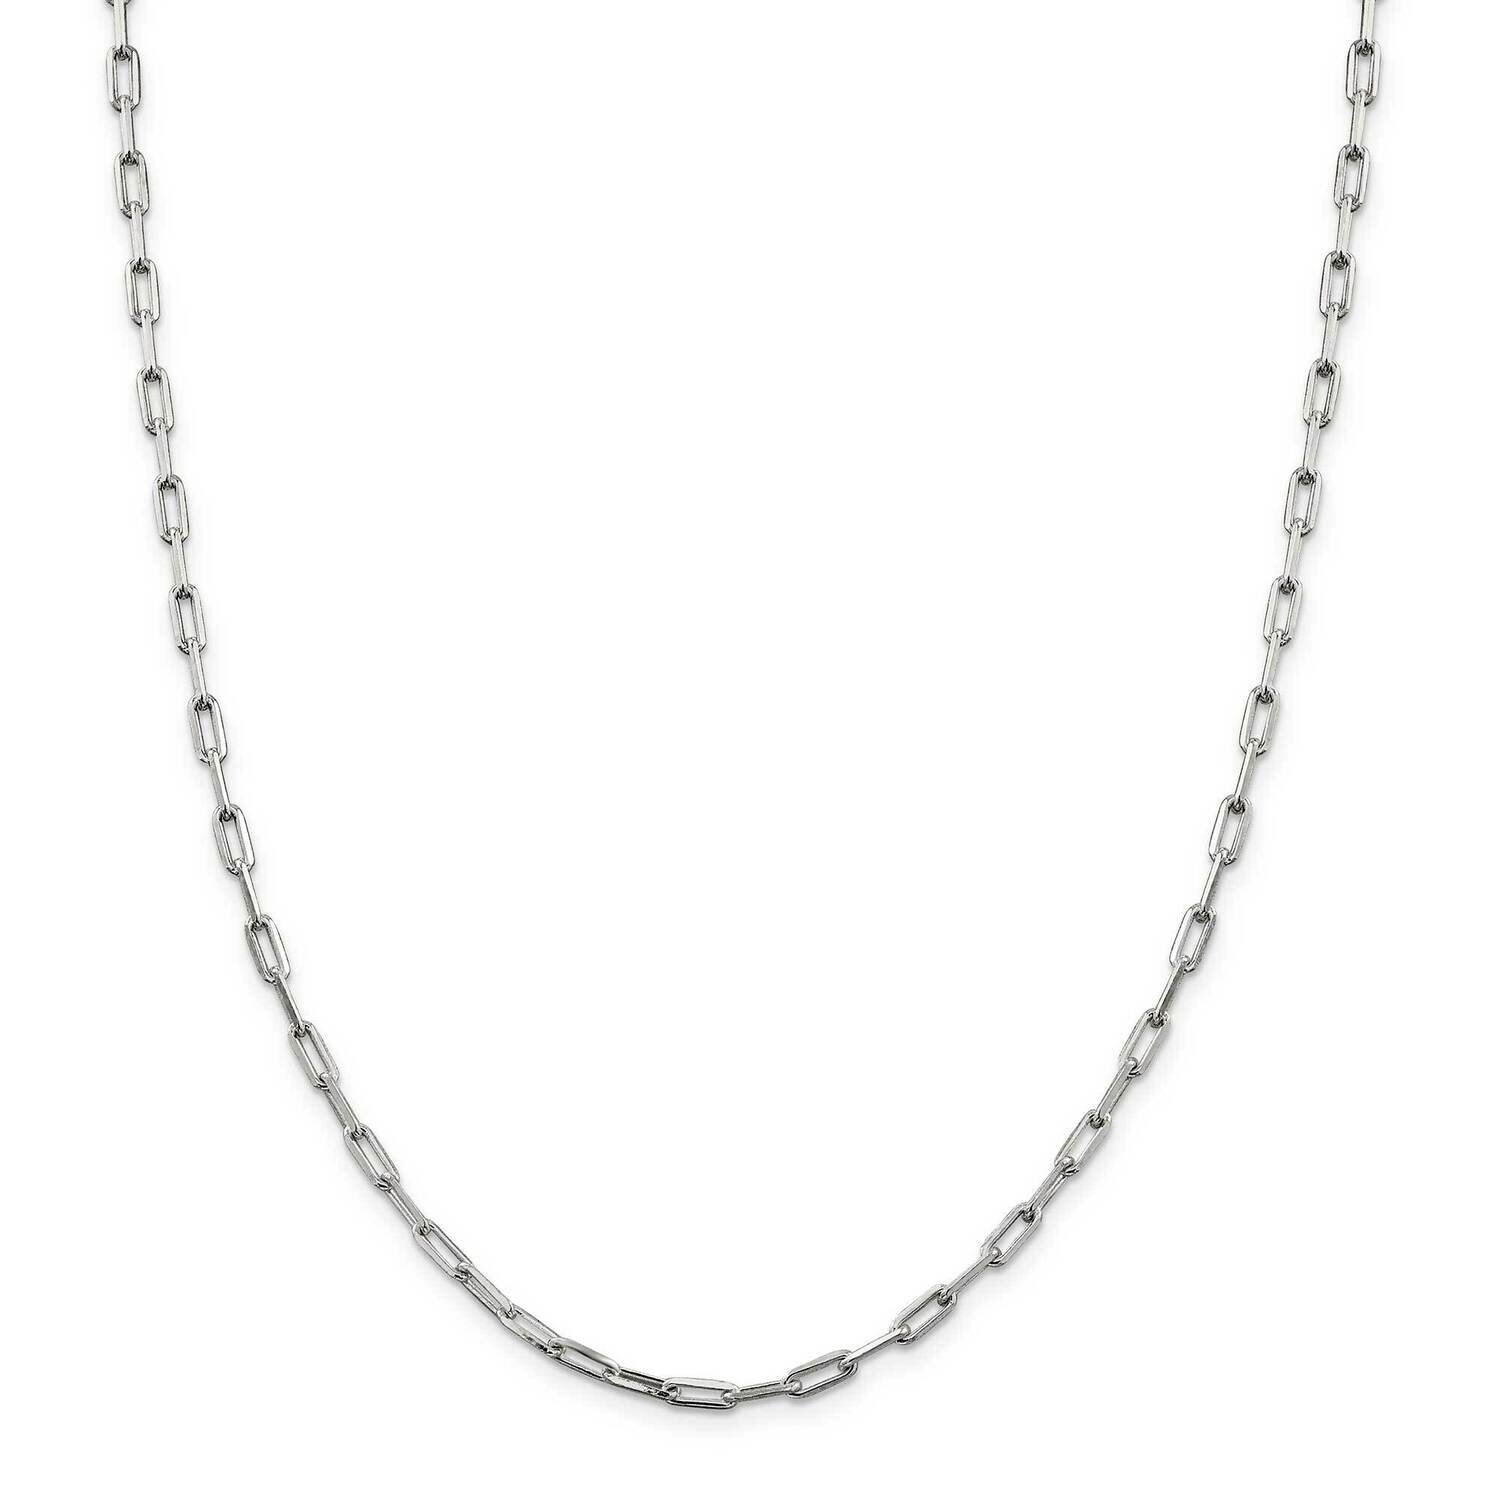 3.25mm Elongated Open Link Chain 36 Inch Sterling Silver QFC53-36